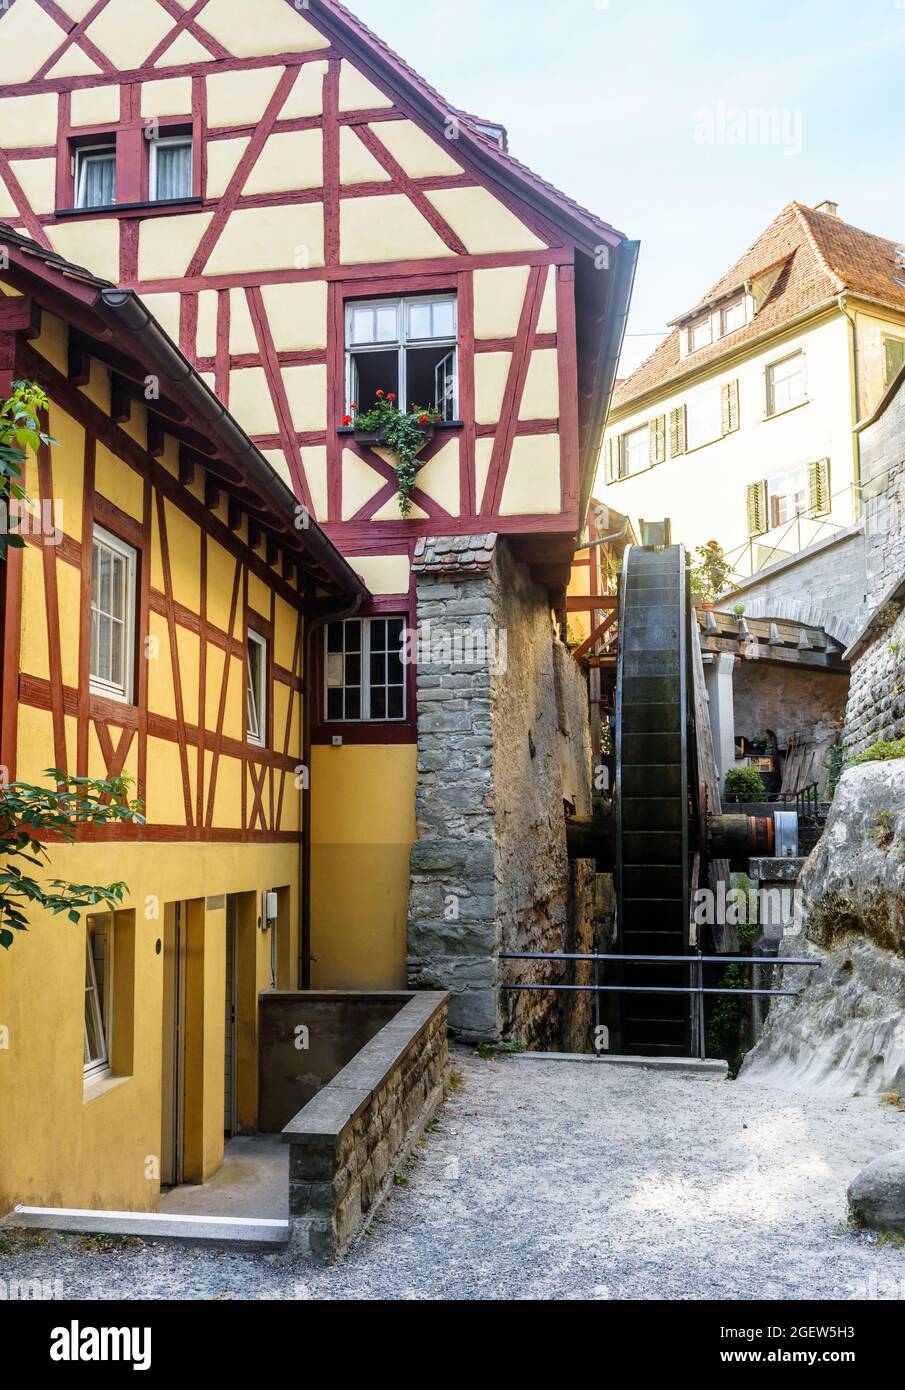 Water mill in Meersburg, Germany. Vertical view of old half-timbered houses and medieval mill wheel. This place is tourist attraction of city. Concept Stock Photo